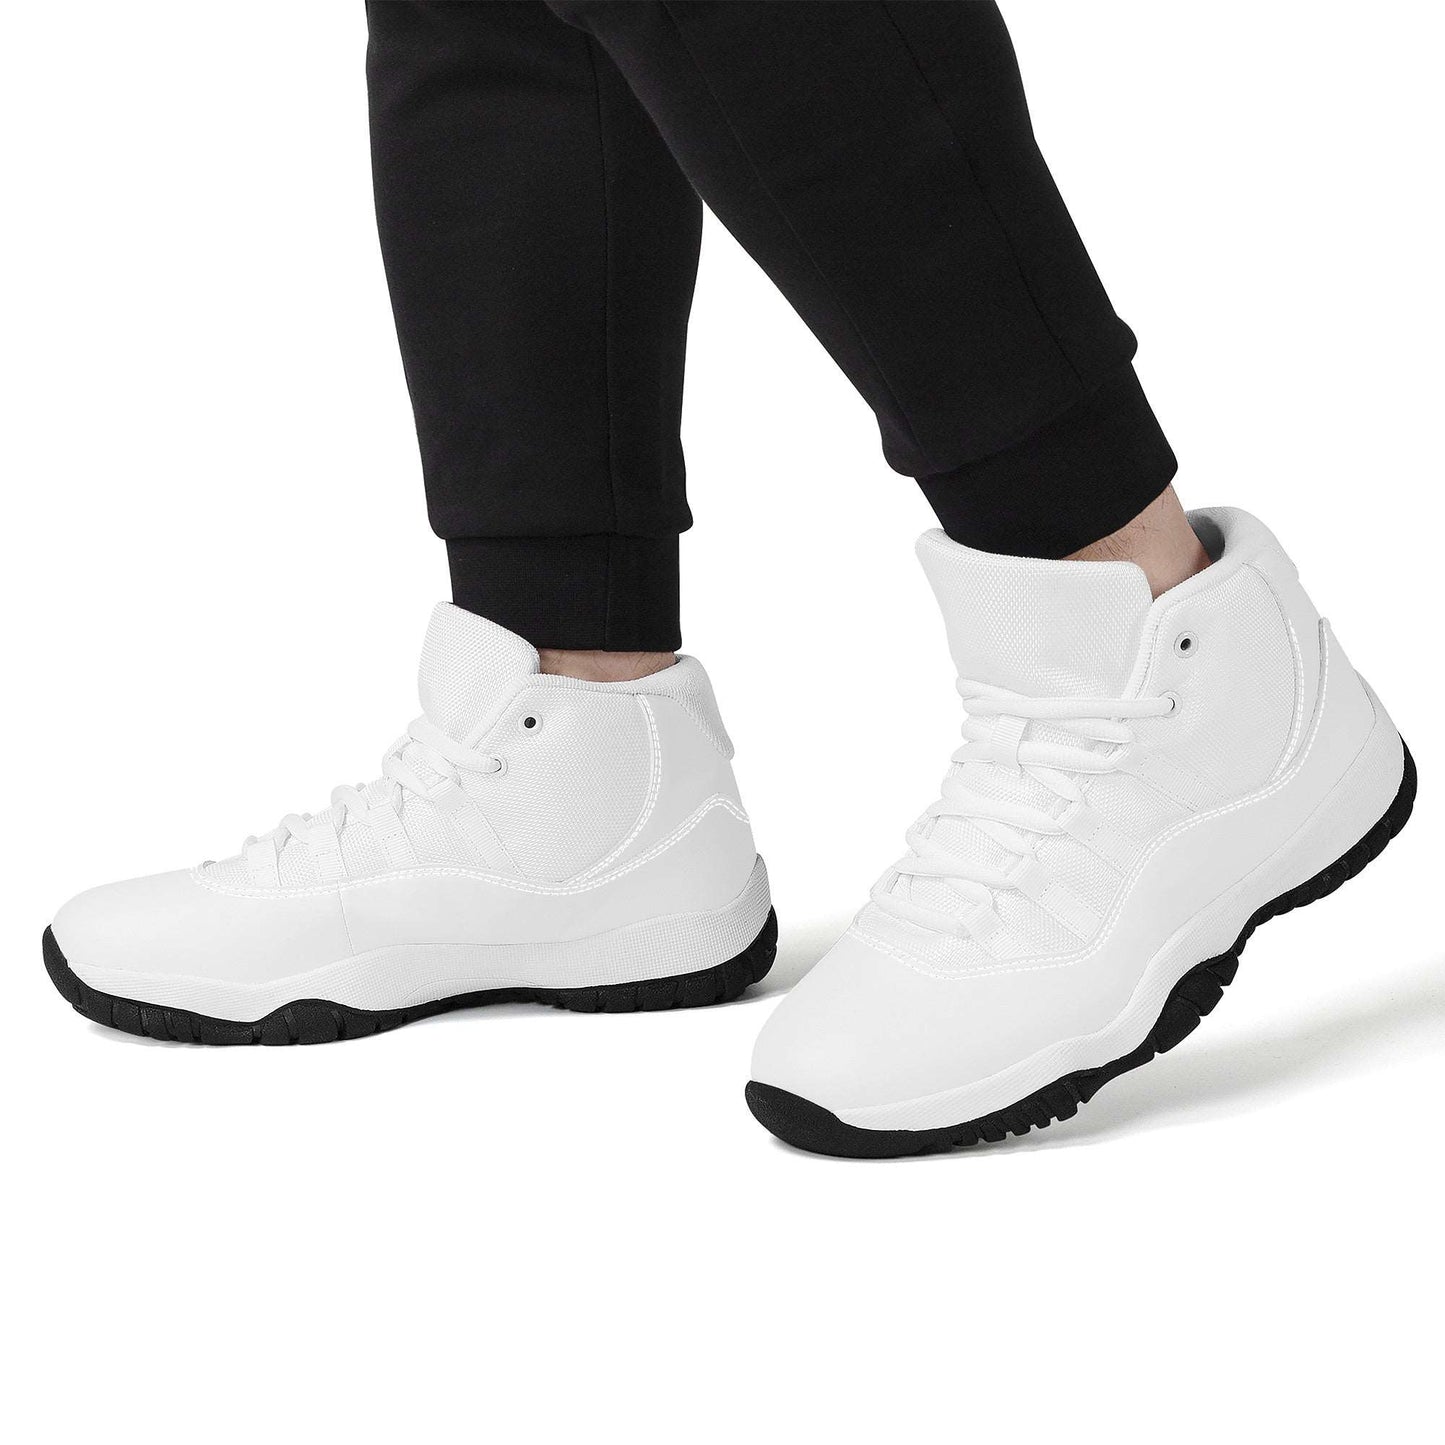 Create Your Own - High Top Air Retro Sneakers - White - HayGoodies